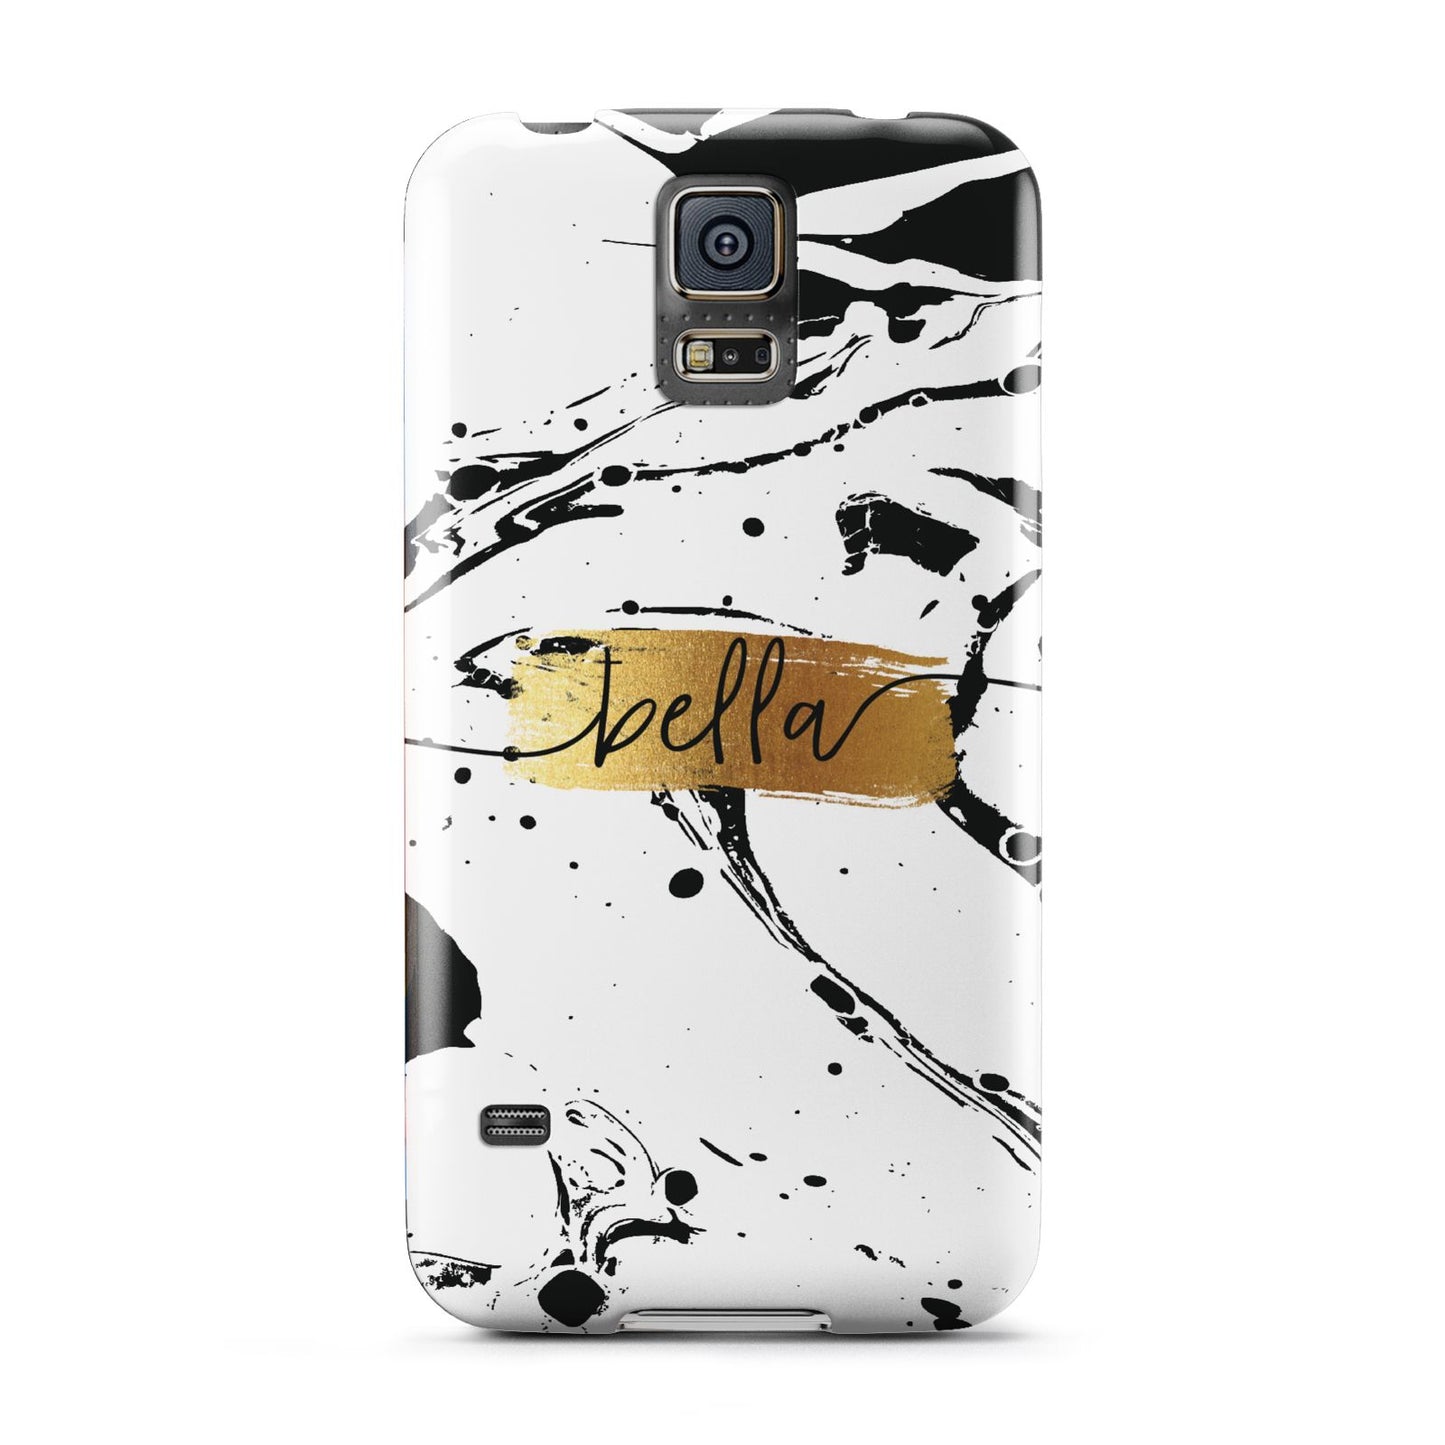 Personalised White Gold Swirl Marble Samsung Galaxy S5 Case